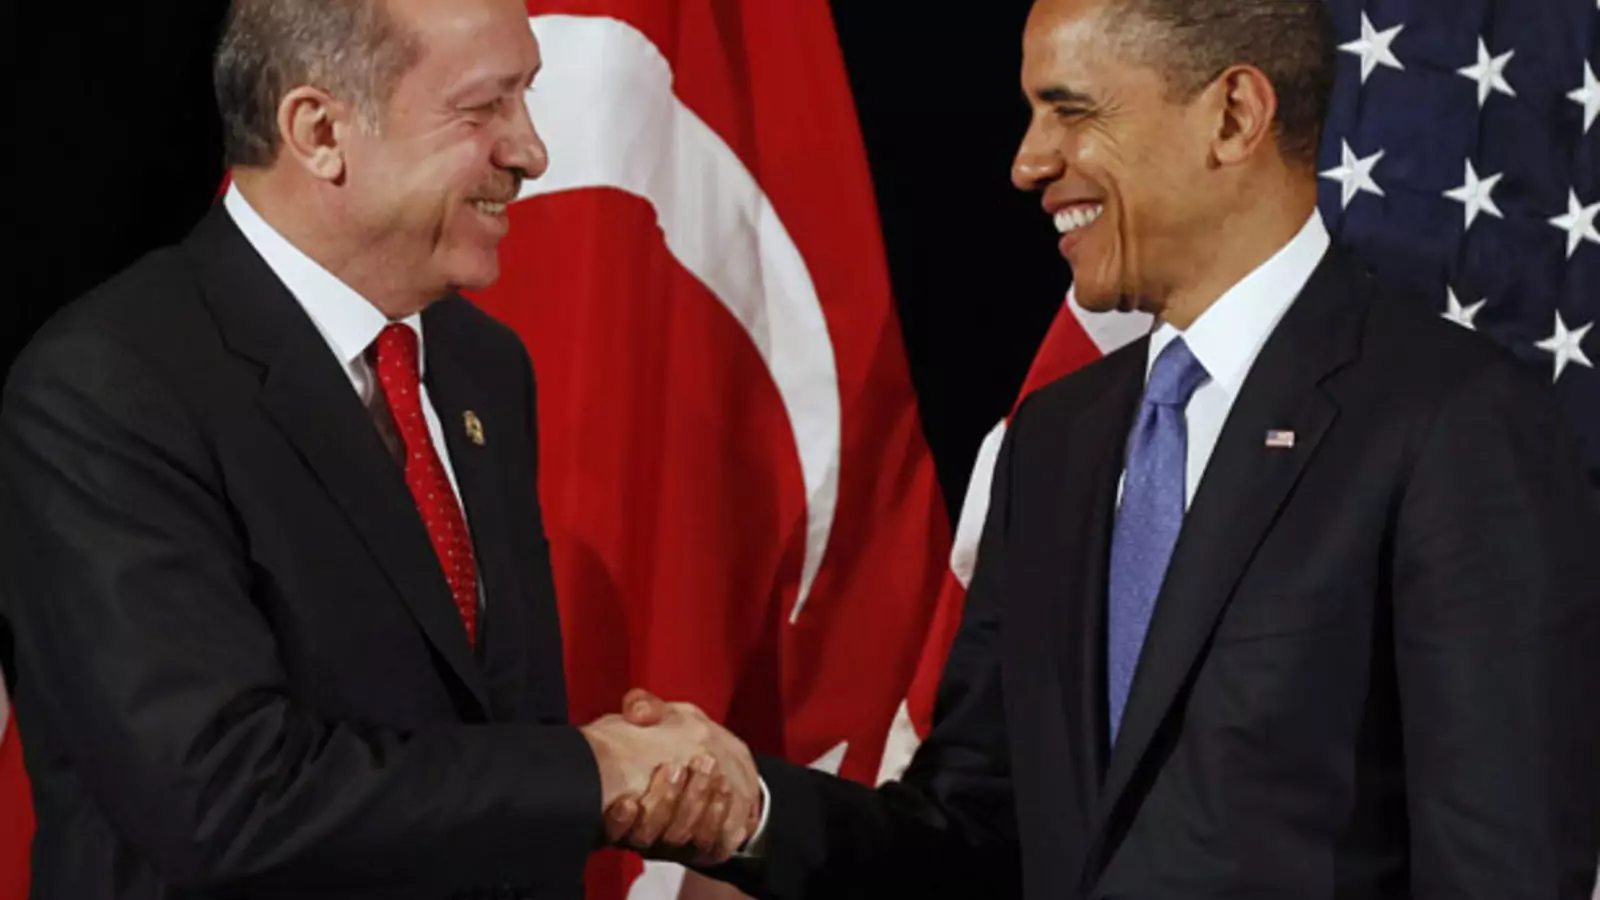 President Barack Obama shakes hands with Turkish prime minister Recep Tayyip Erdogan (Larry Downing/Courtesy Reuters).